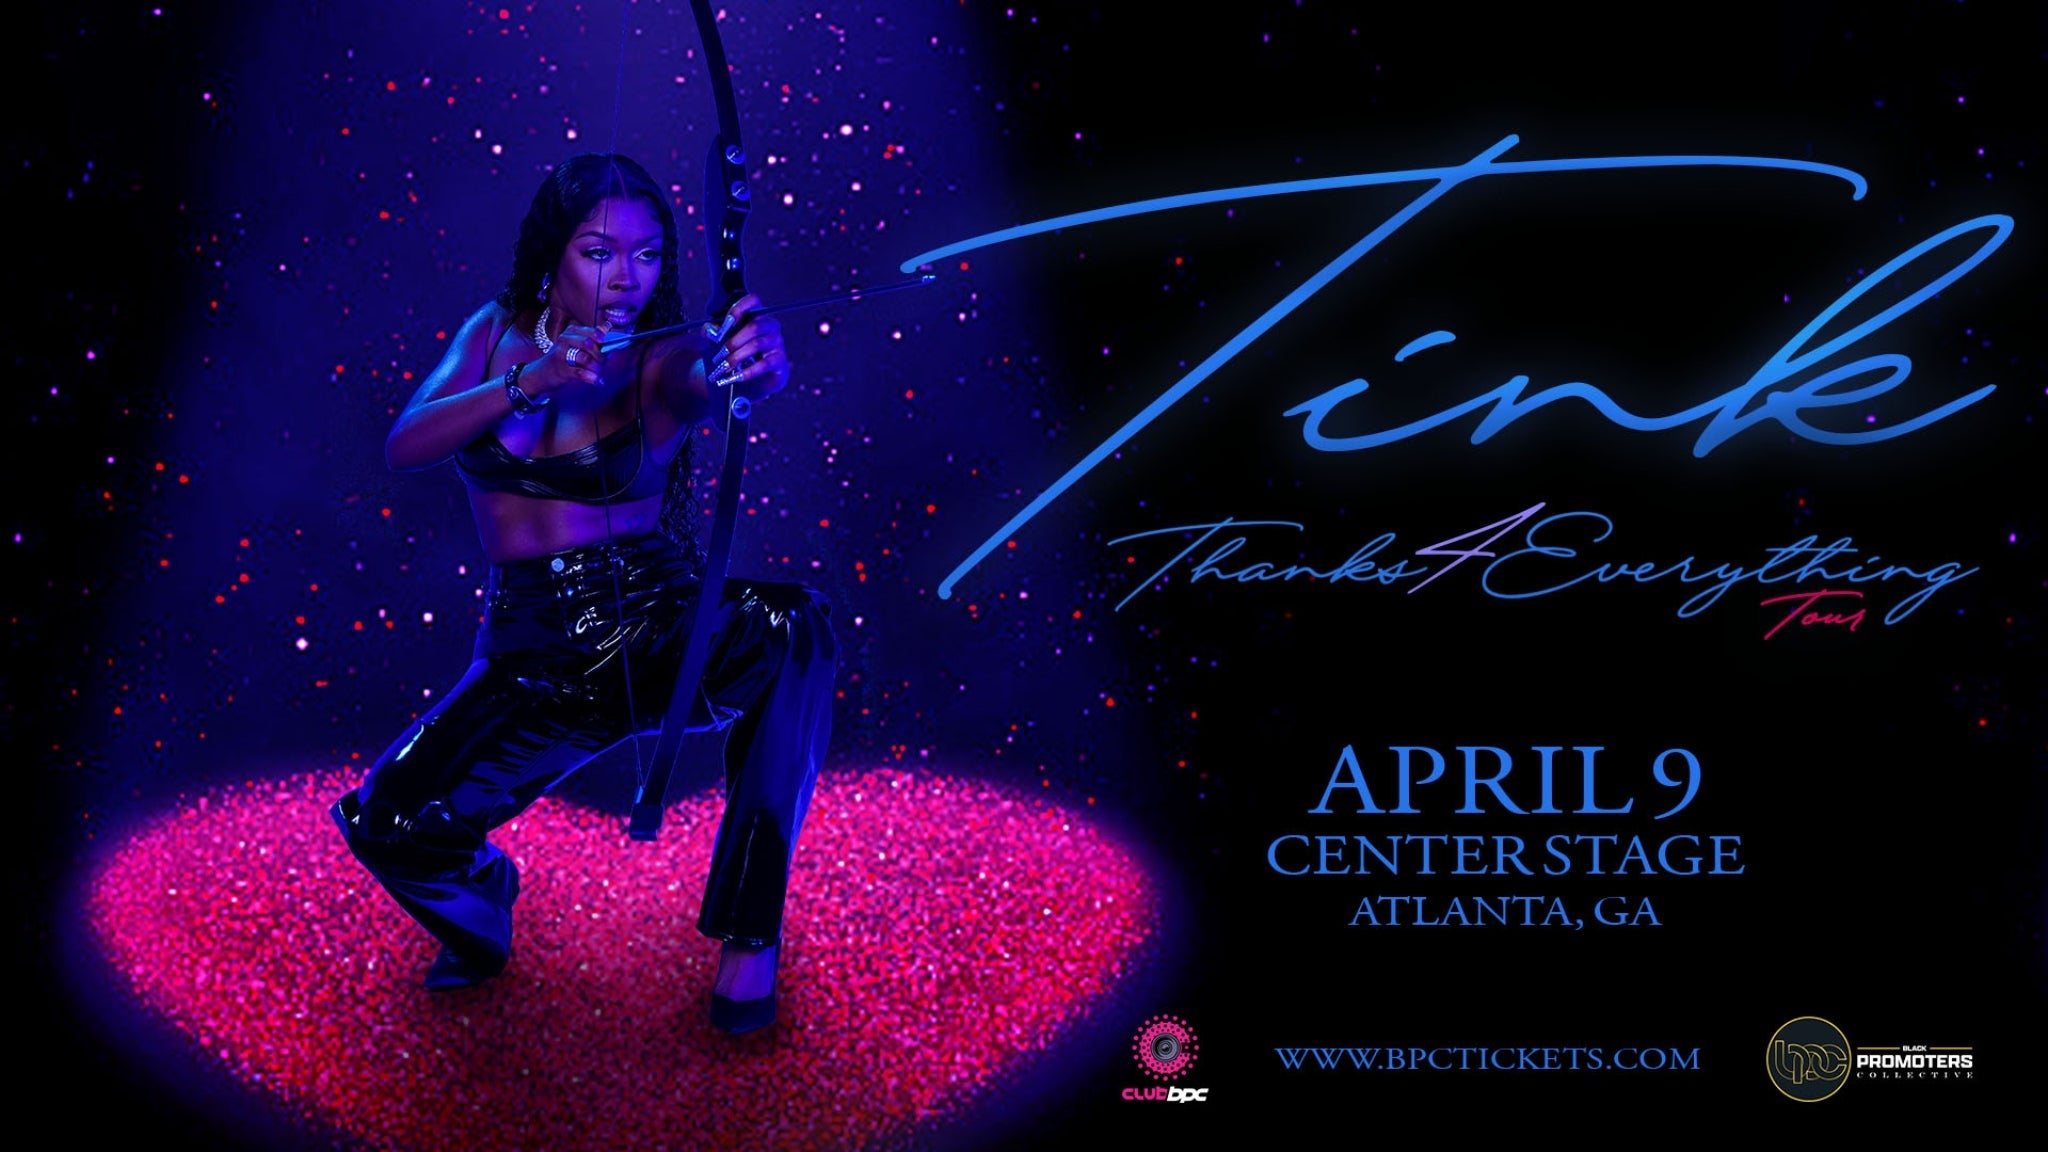 Tink & Friends Thanks 4 Everything Tour tickets, presale info